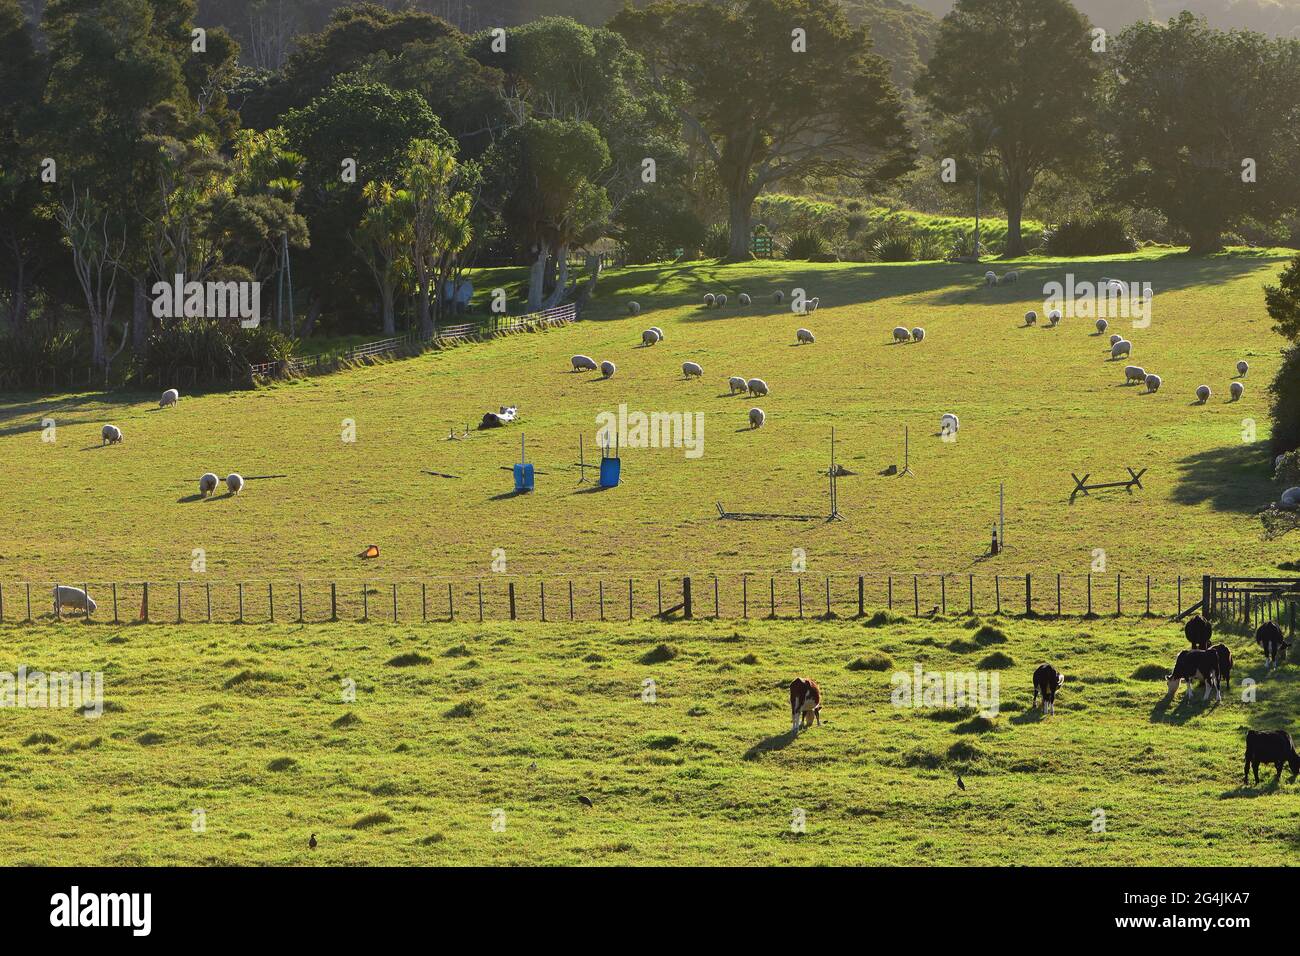 Green paddock with large trees to create shade divided between sheep and cows by wire fence. Stock Photo